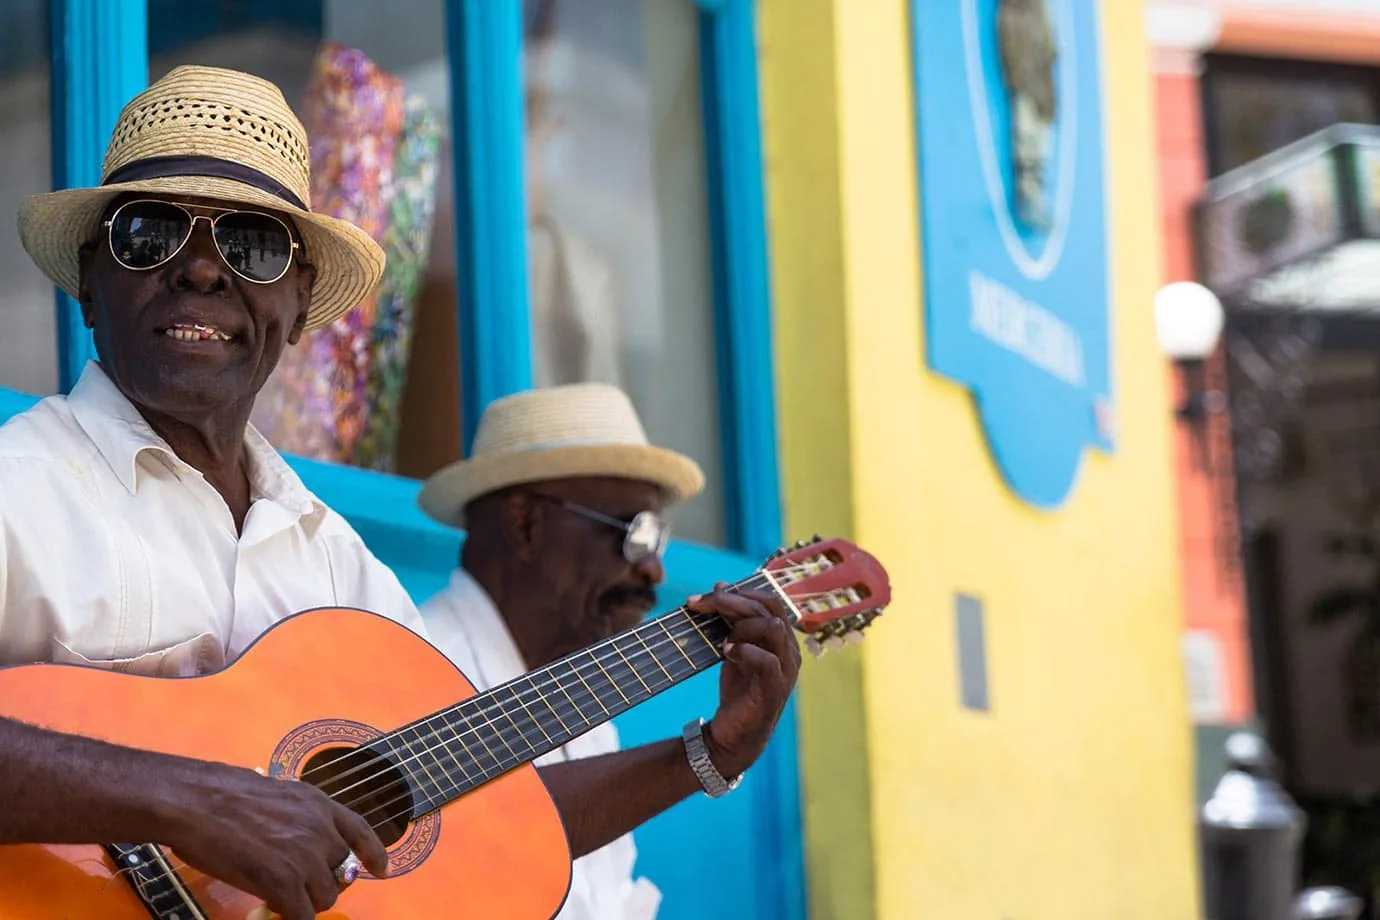 what to see in havana